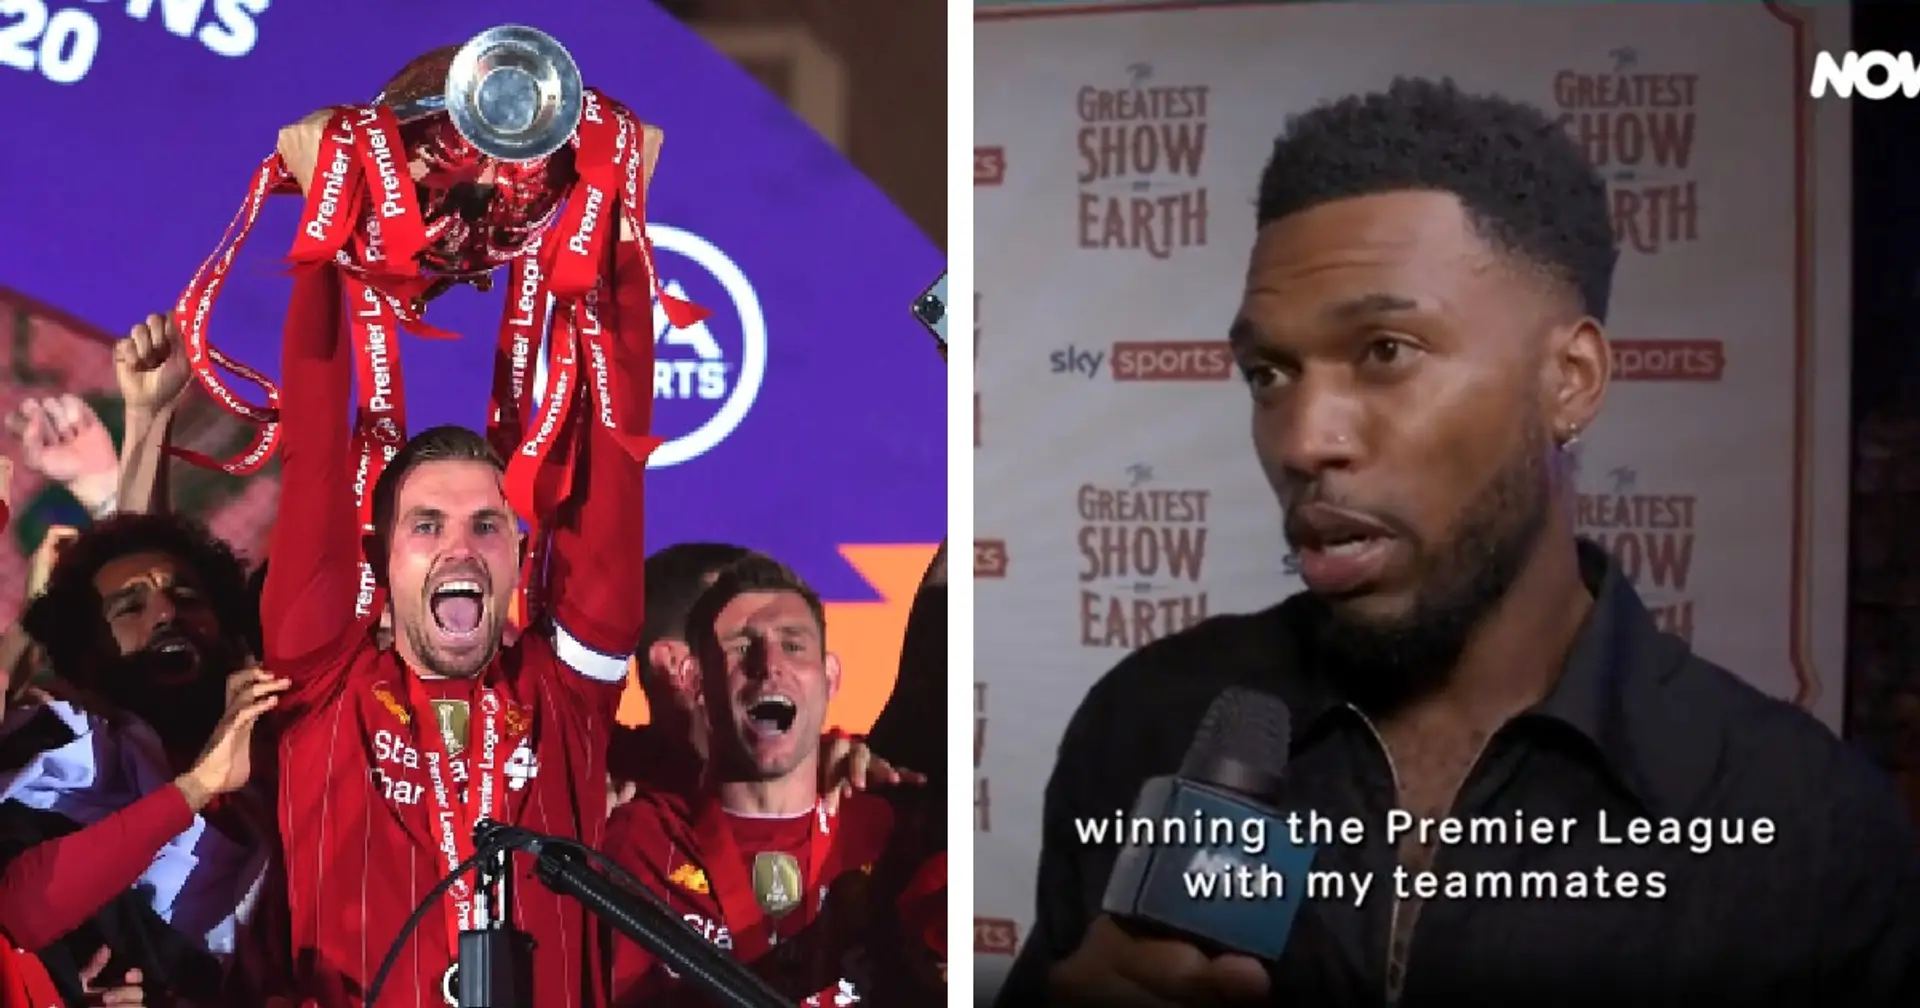 'Would've been nice to be a part of that': Sturridge on leaving Liverpool before title-winning season